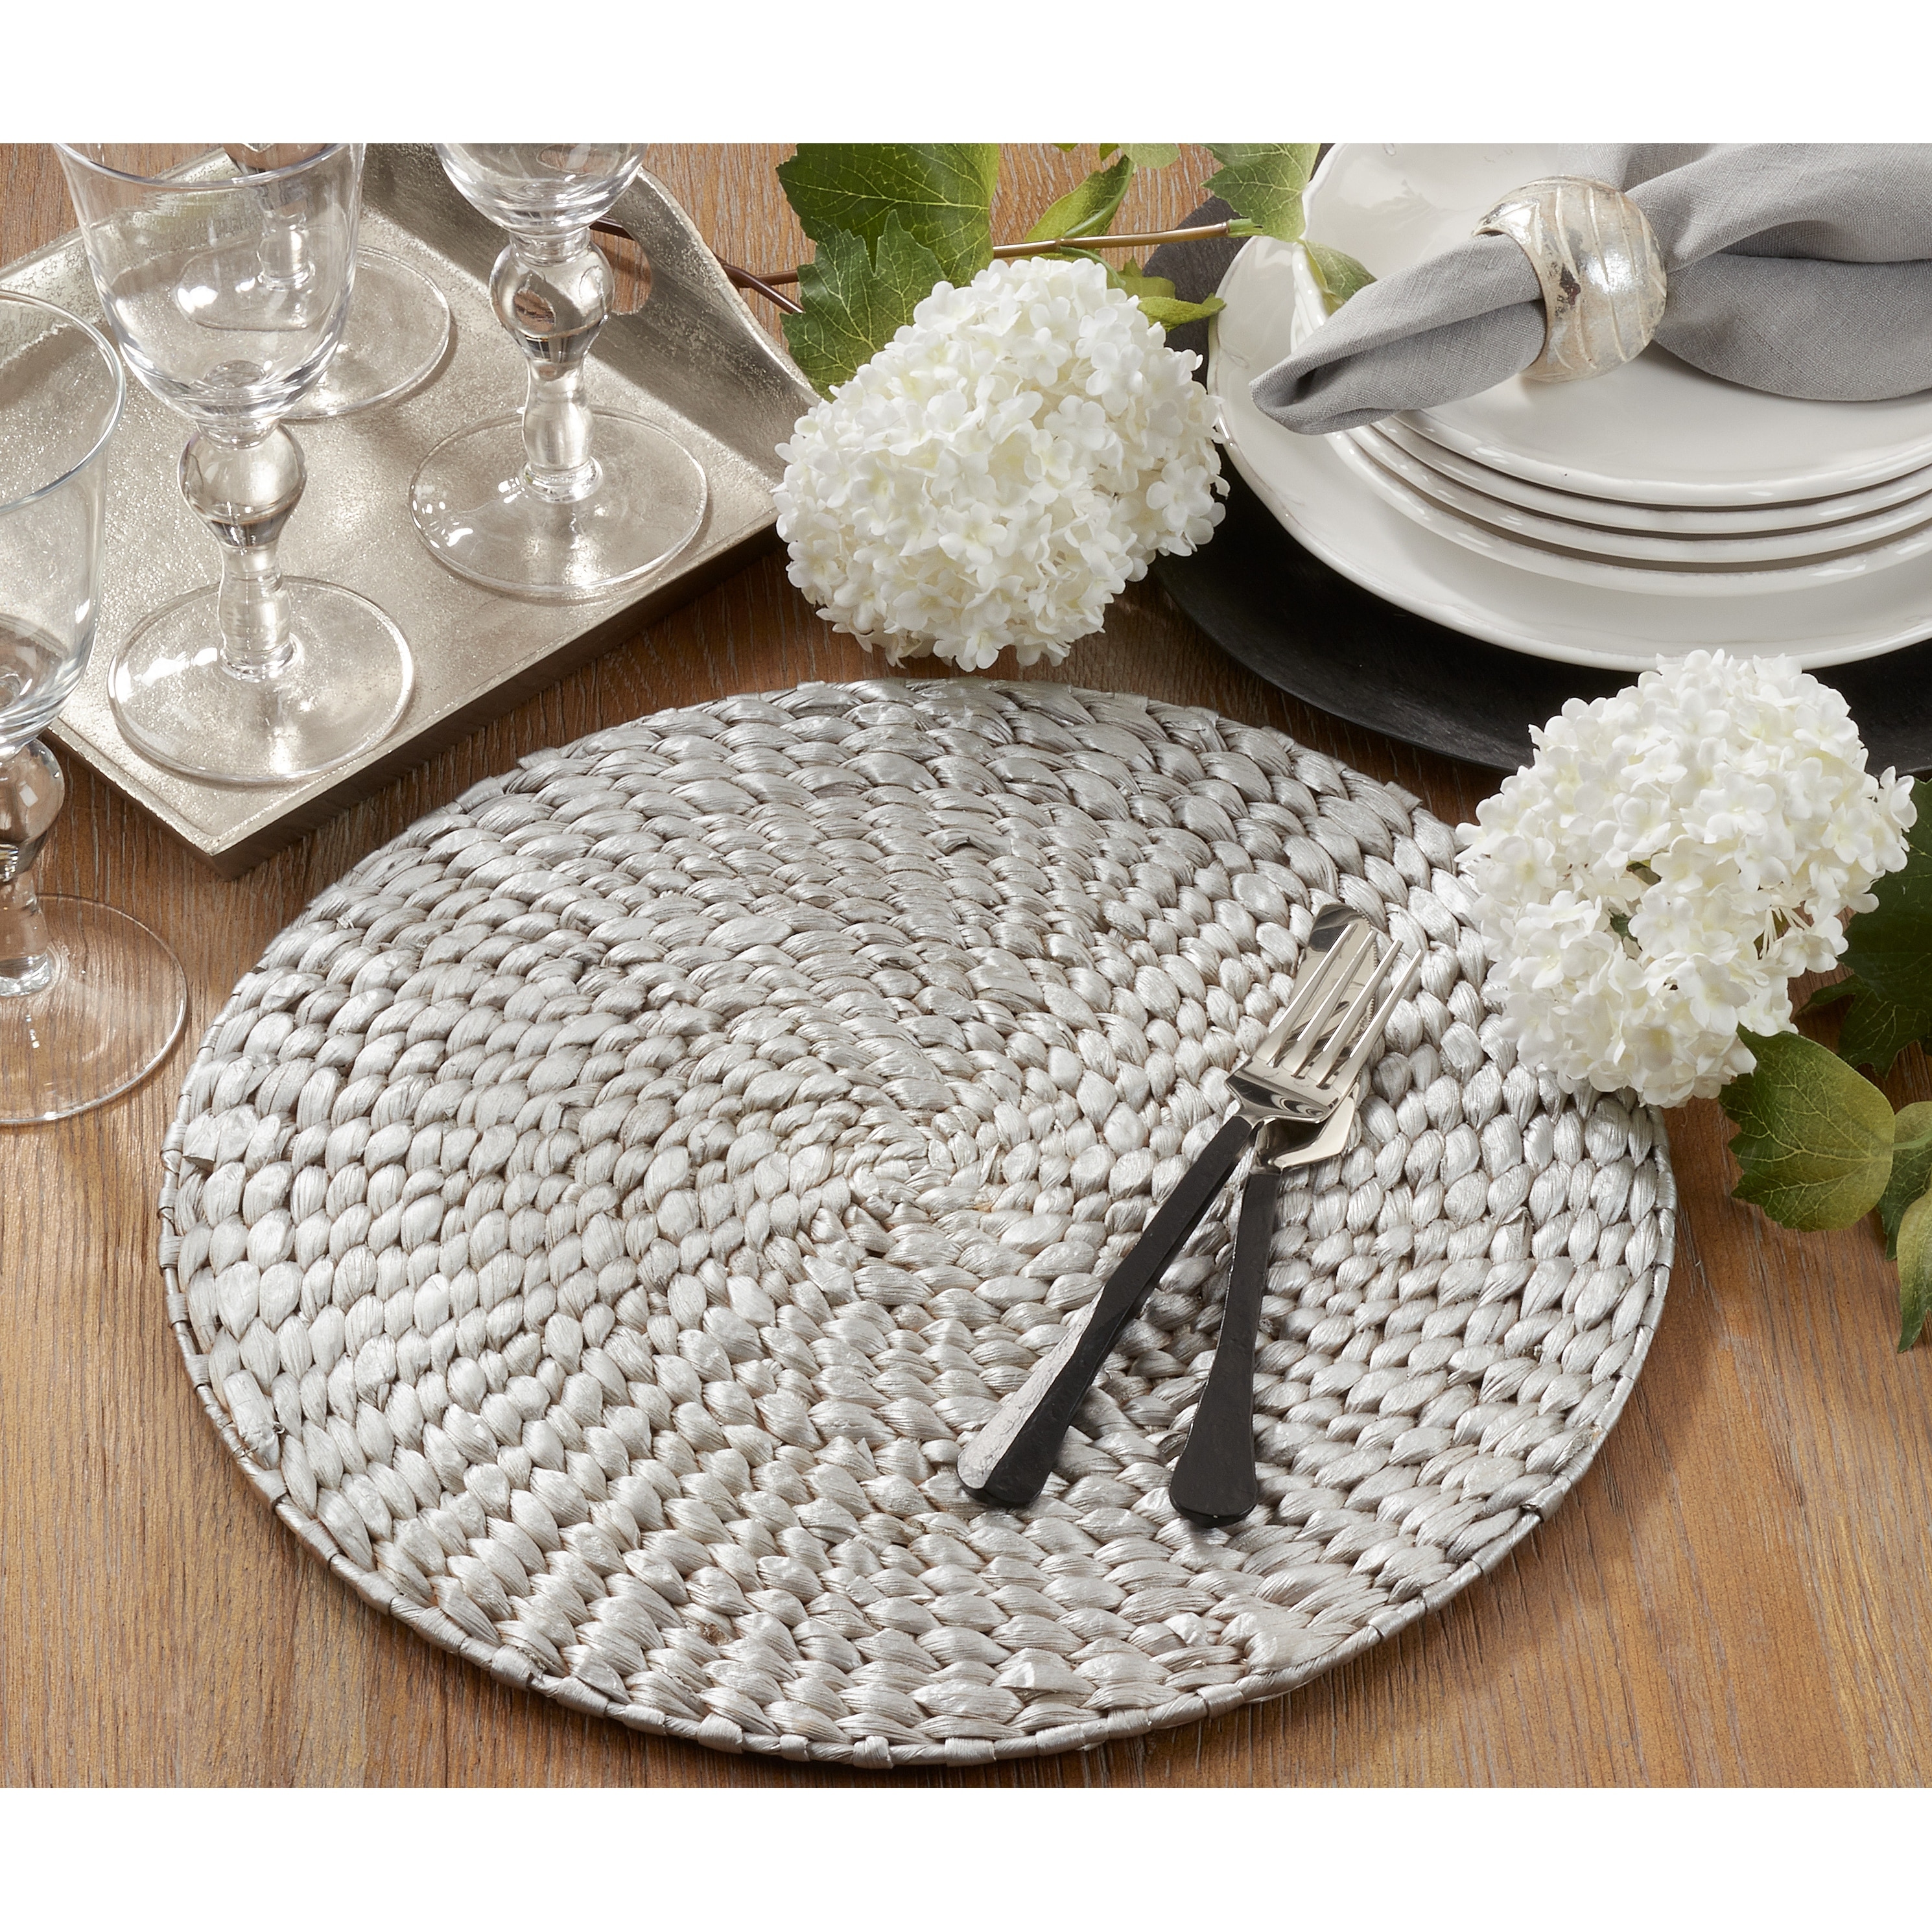 Set of 4 SARO LIFESTYLE Natural Water Hyacinth Round Hand Woven Rattan Placemat 15 Gold 15 Gold 1404.GL15R